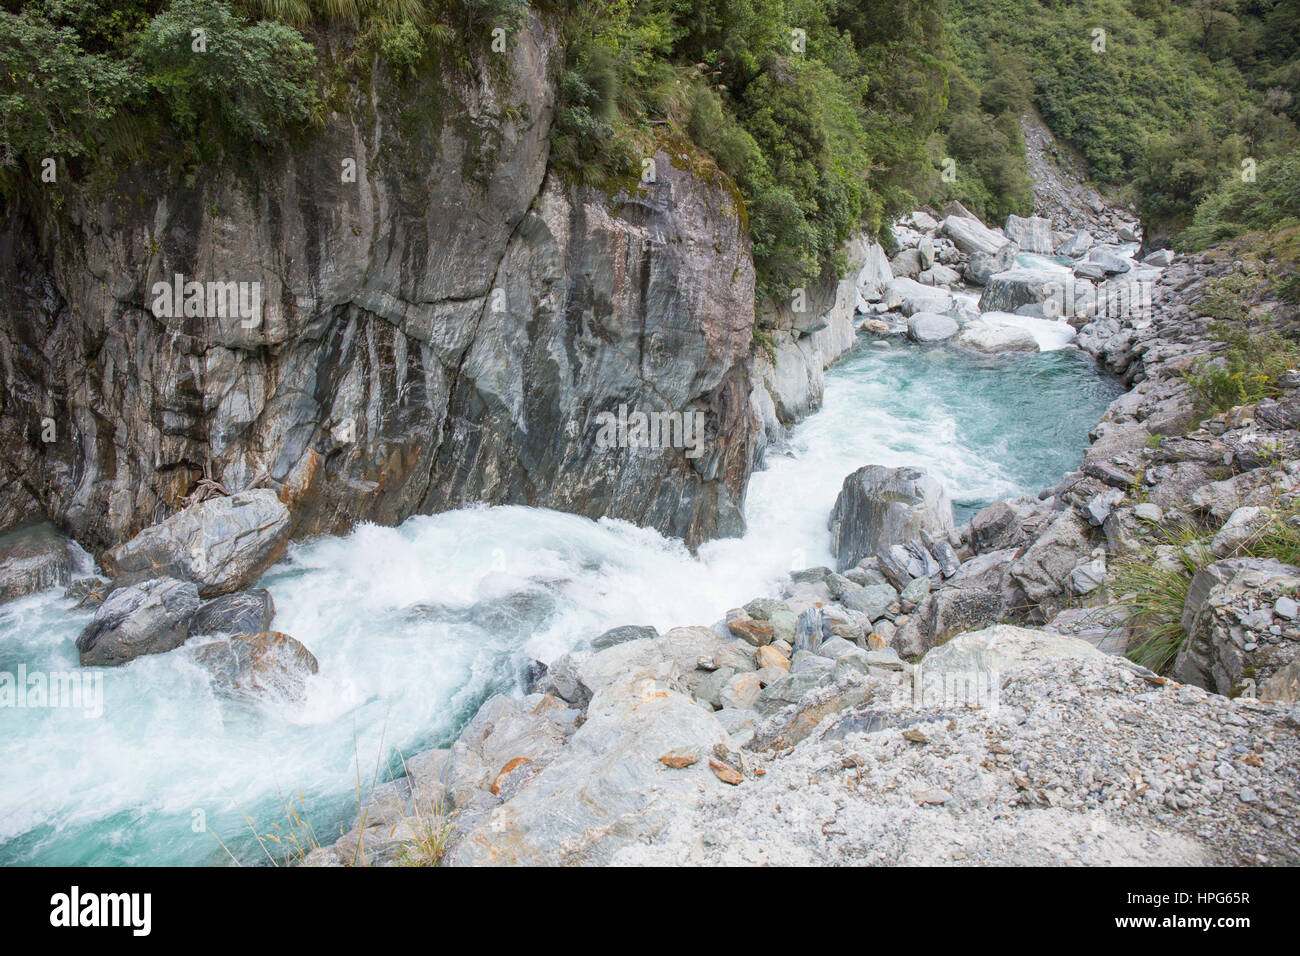 Haast Pass, Mount Aspiring National Park, West Coast, New Zealand. The foaming waters of the Haast River plunging downstream at the Gates of Haast. Stock Photo